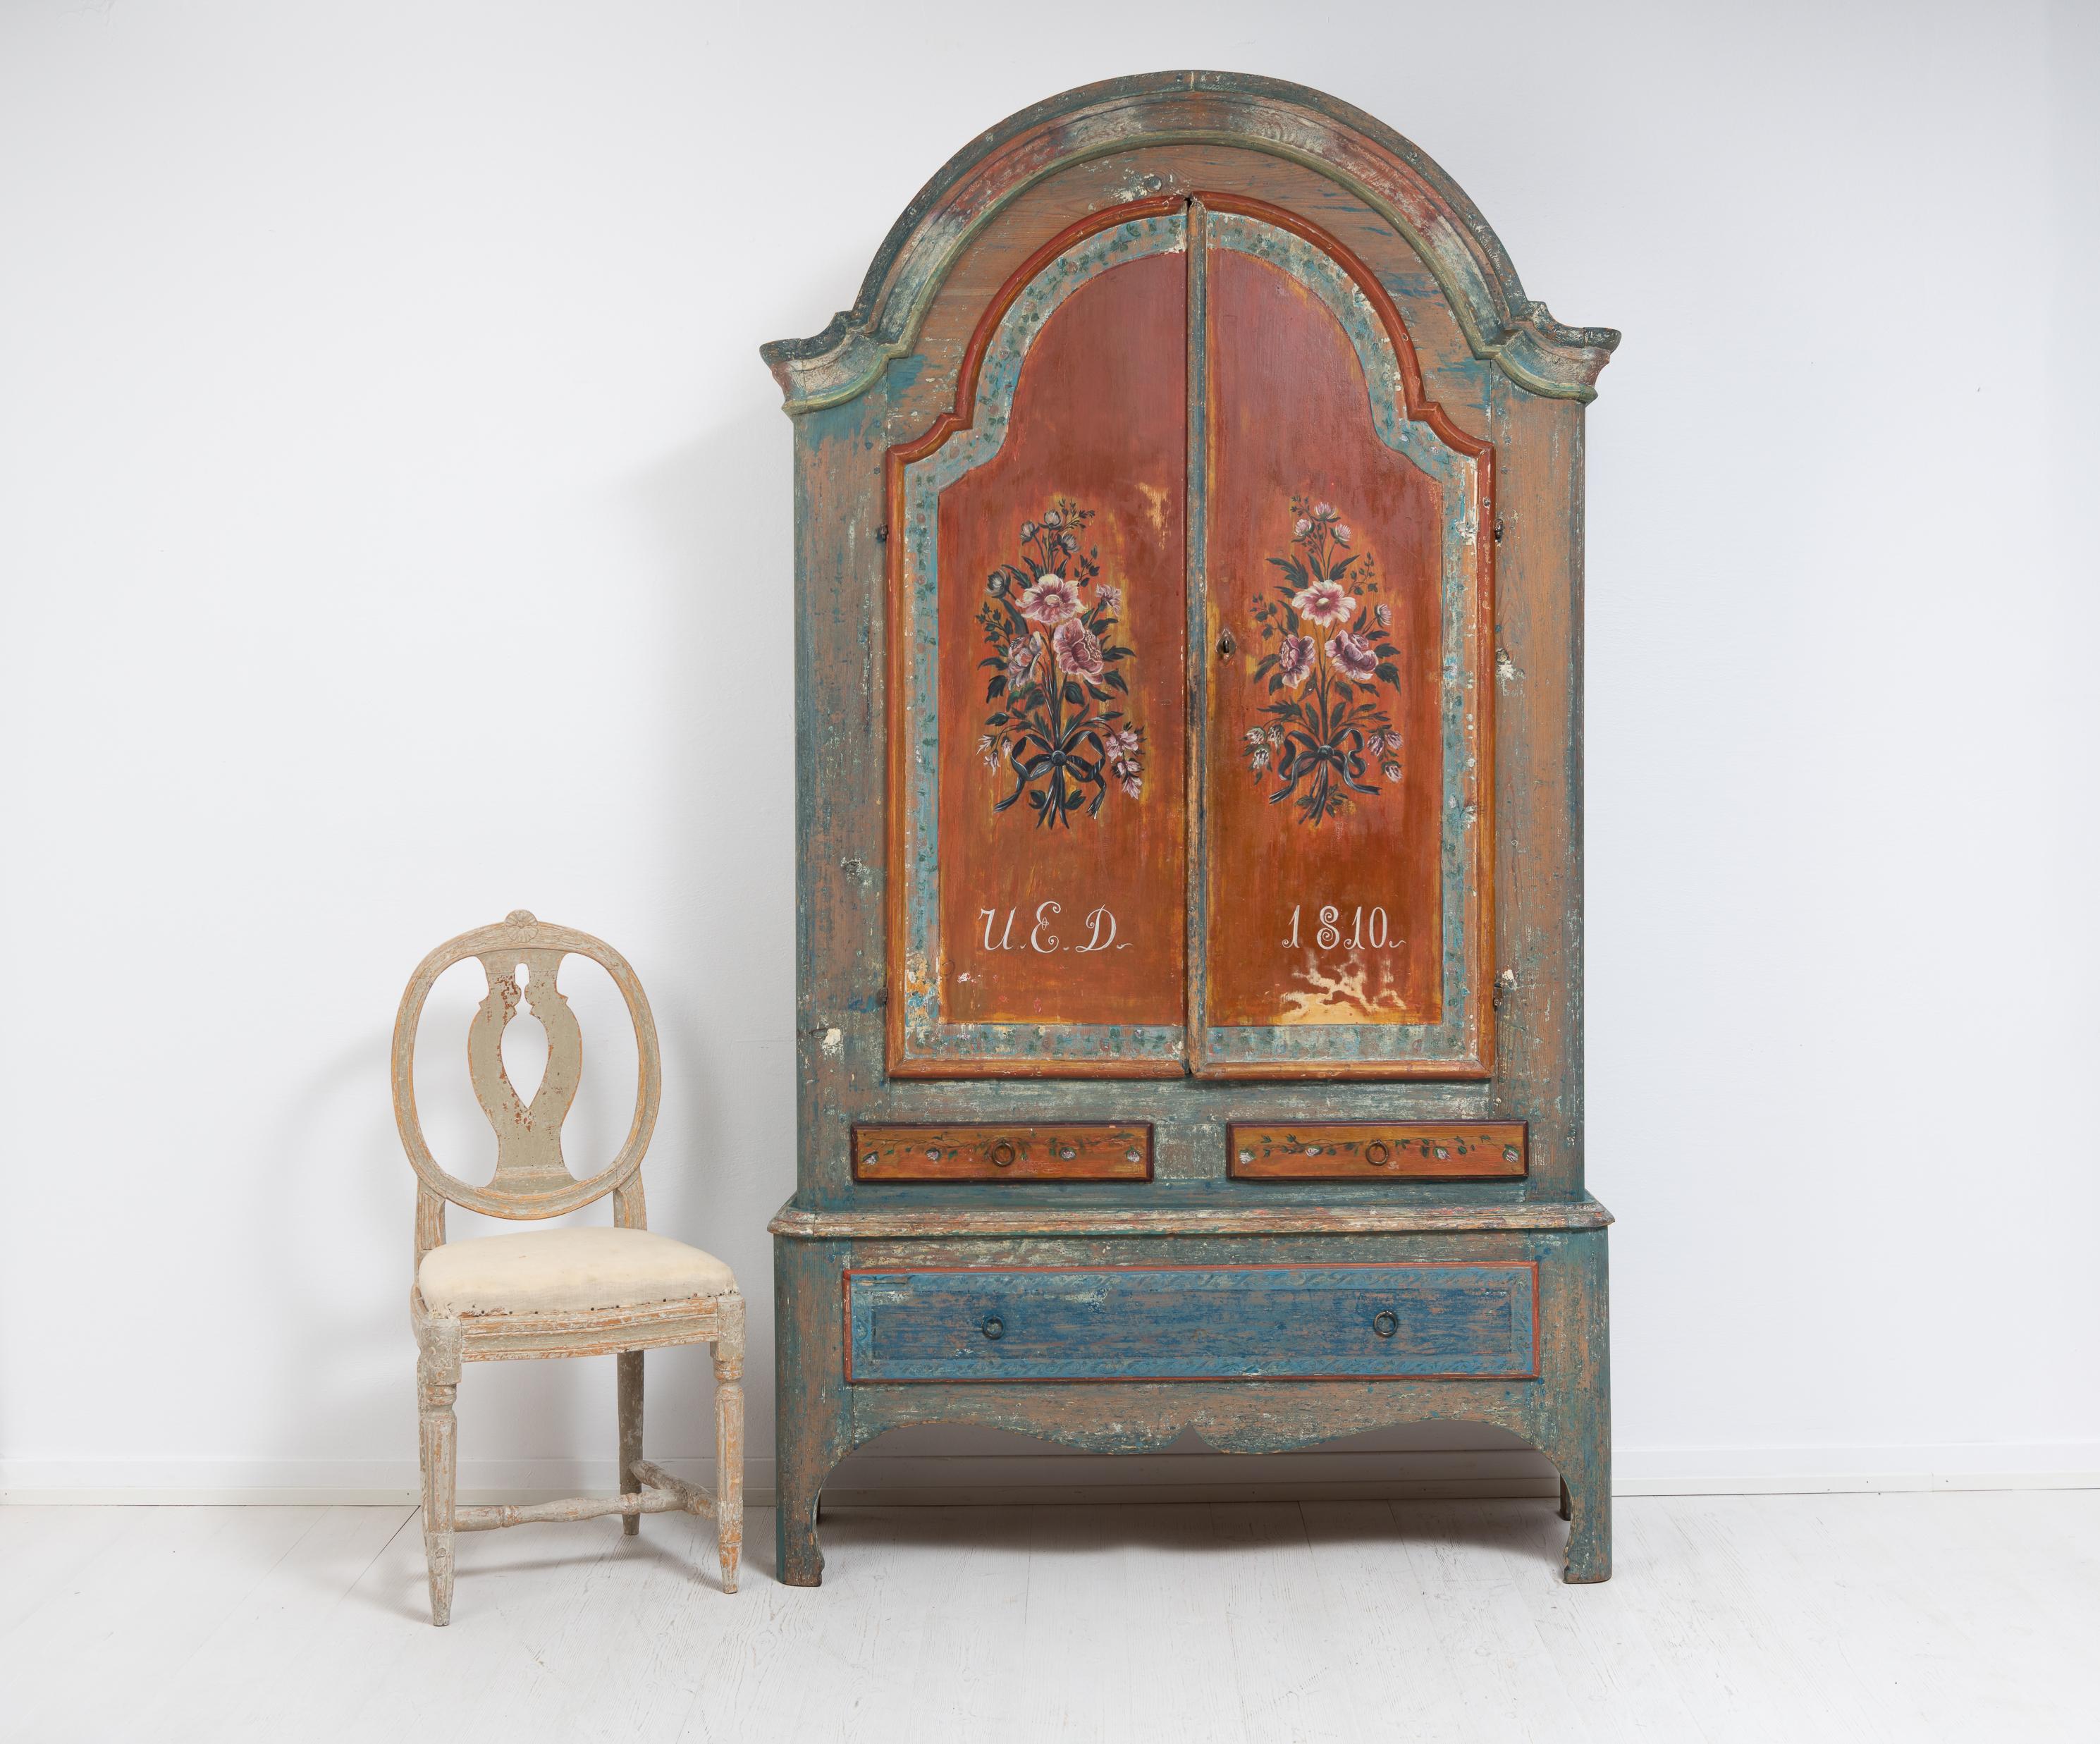 Folk art rococo cabinet from northern Sweden made in painted pine. The cabinet has the original paint and dating from 1810. Because it is a furniture with old original paint there are some marks and traces of distress after use.

The cabinet was